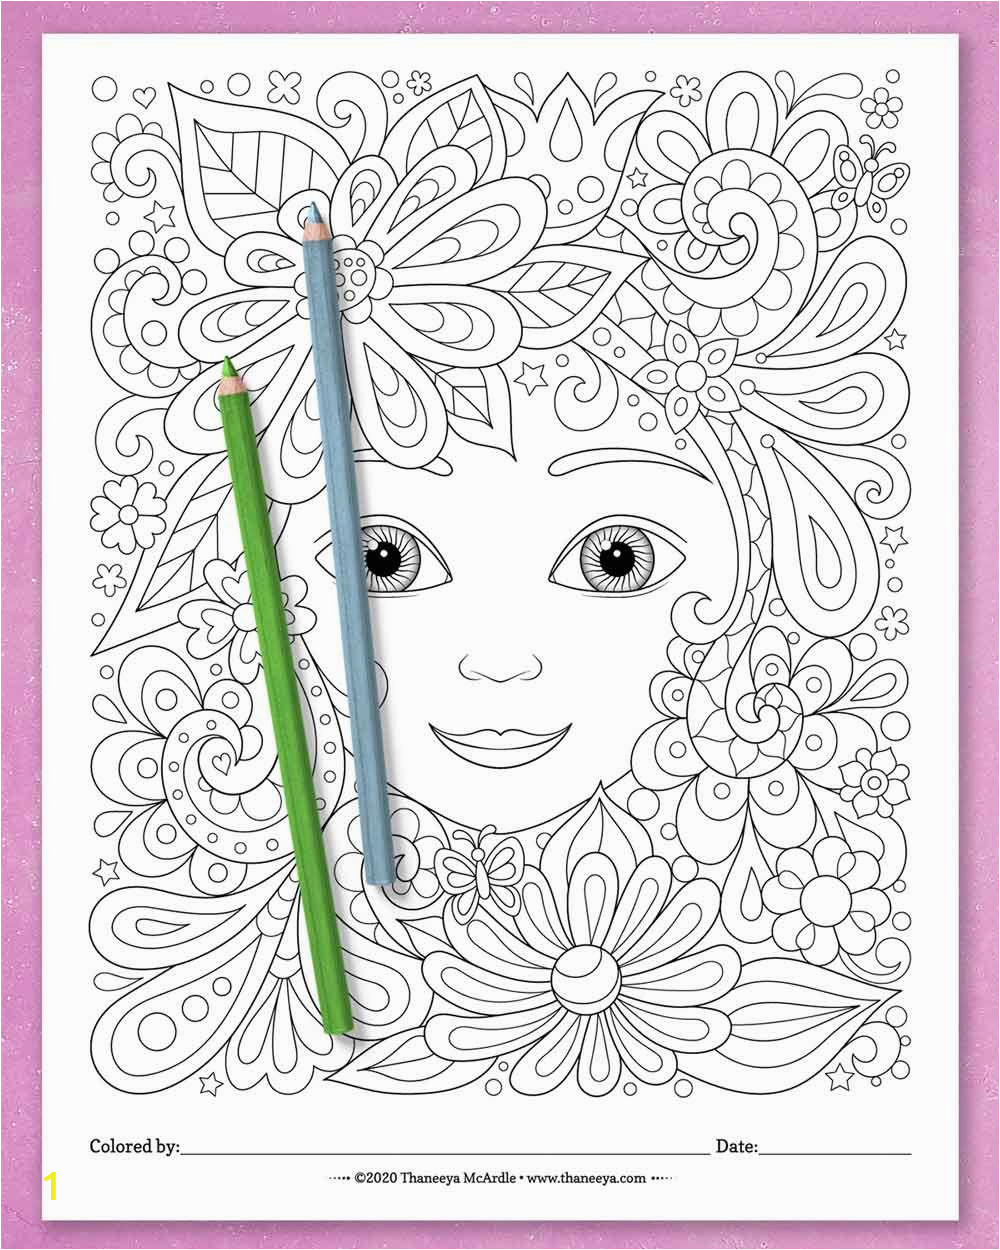 Coloring Pages for Gel Pens Pin On Coloring Pages by Thaneeya Printable Pdfs